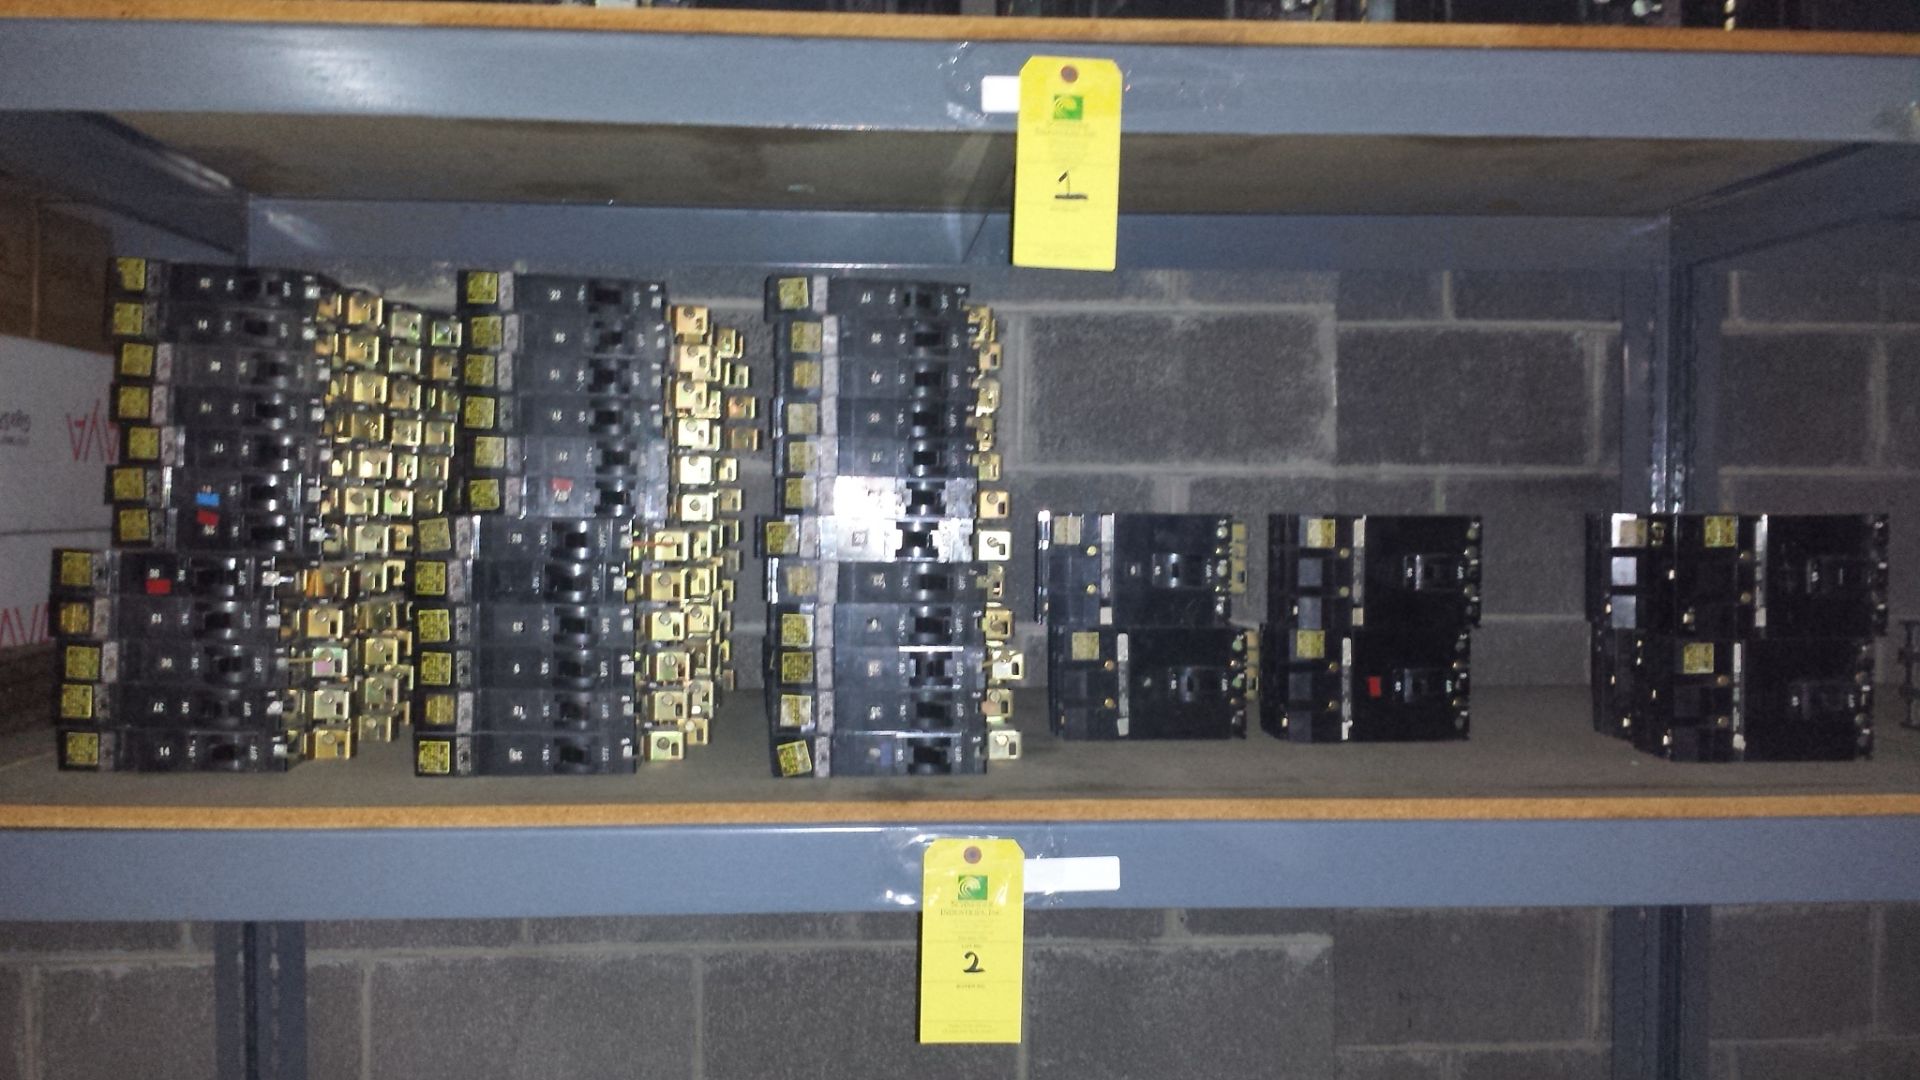 One Shelf of Square D Circuit Breakers Including: FY14020A=53, FY14020B=53, FY14020C=54, FA34030=